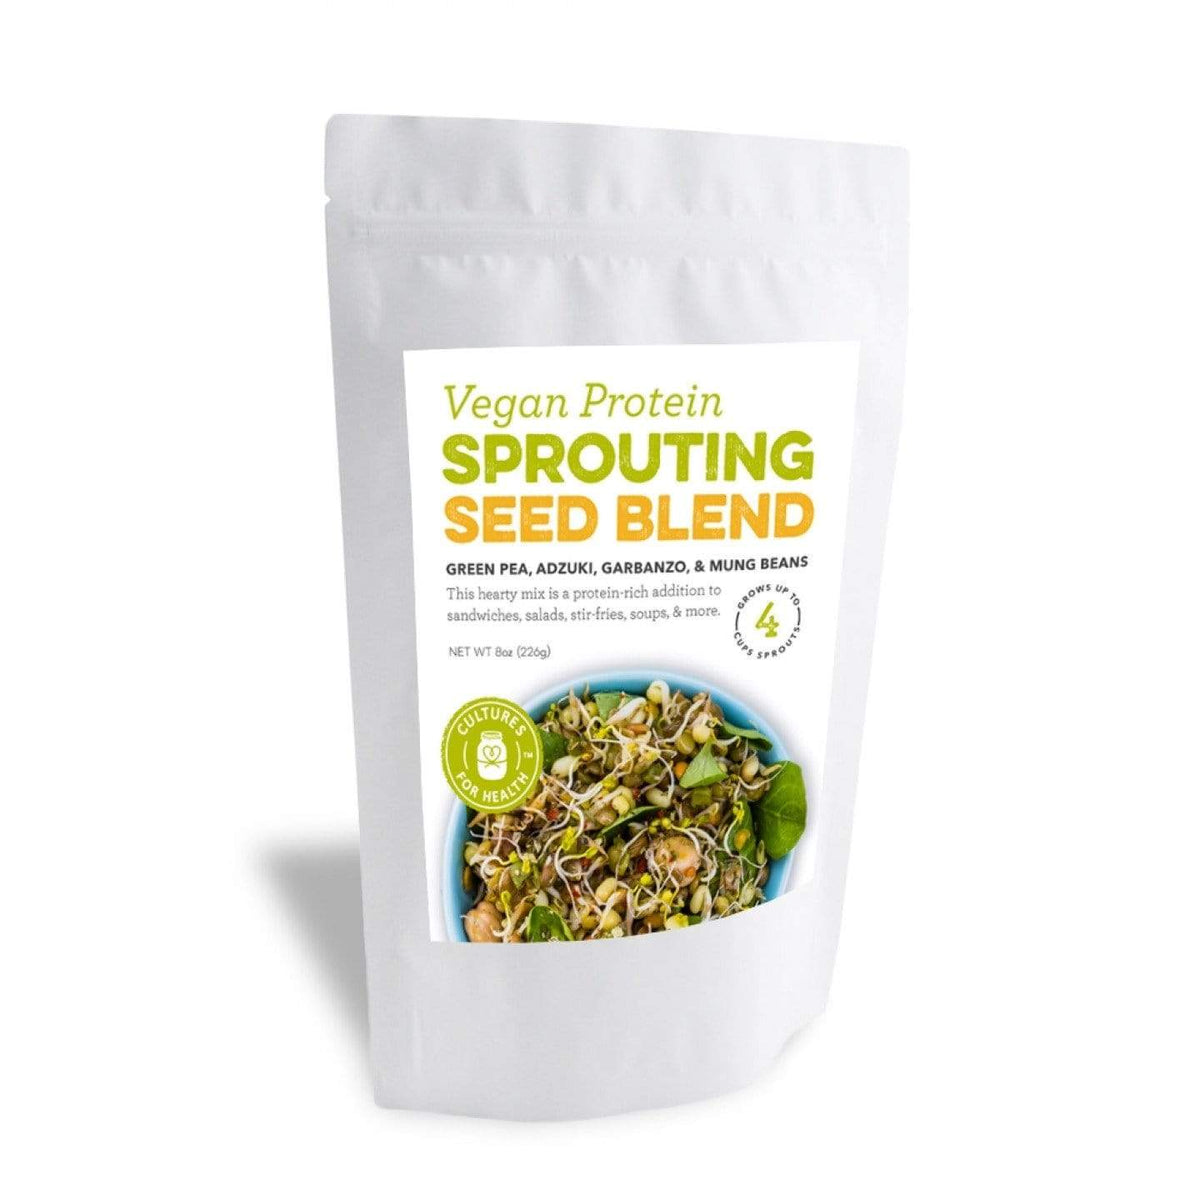 Sprouting &amp; Wheatgrass Vegan Protein Sprouting Seed Blend